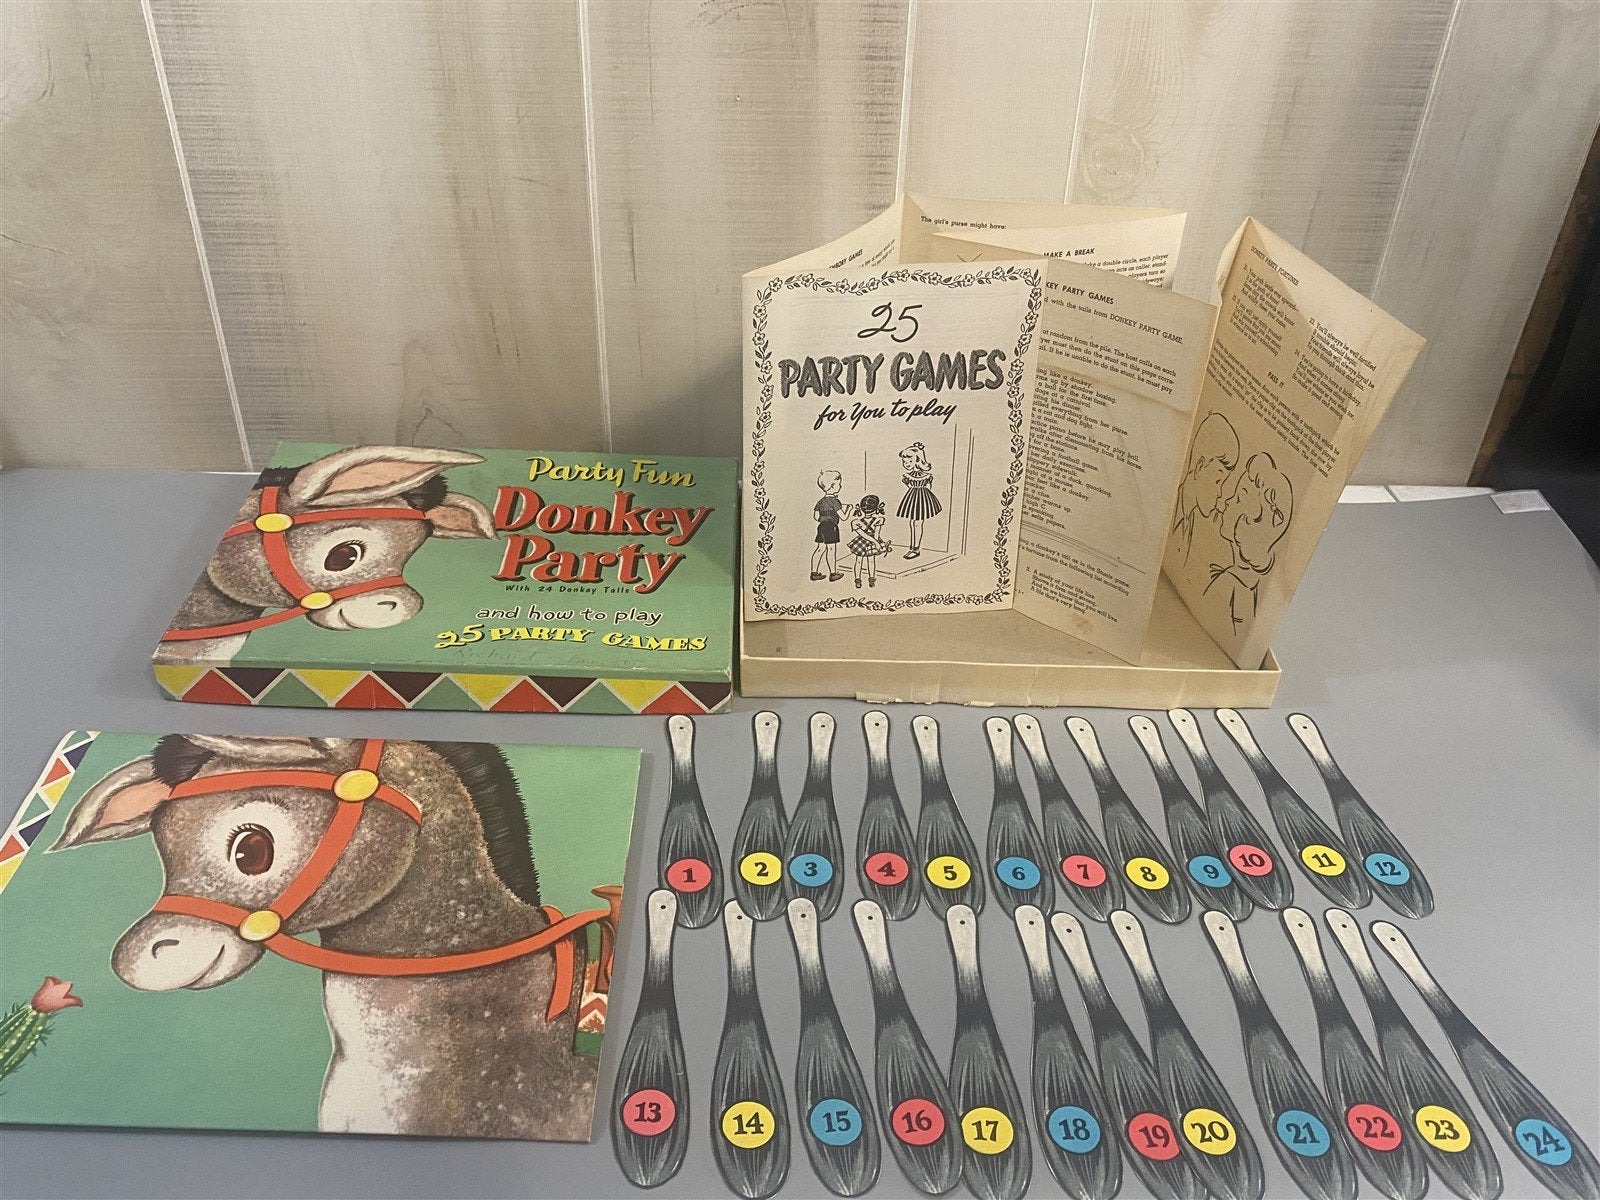 Party Fun 1952 Donkey Party with 24 Donkey Tails and How To Play 25 PARTY GAMES